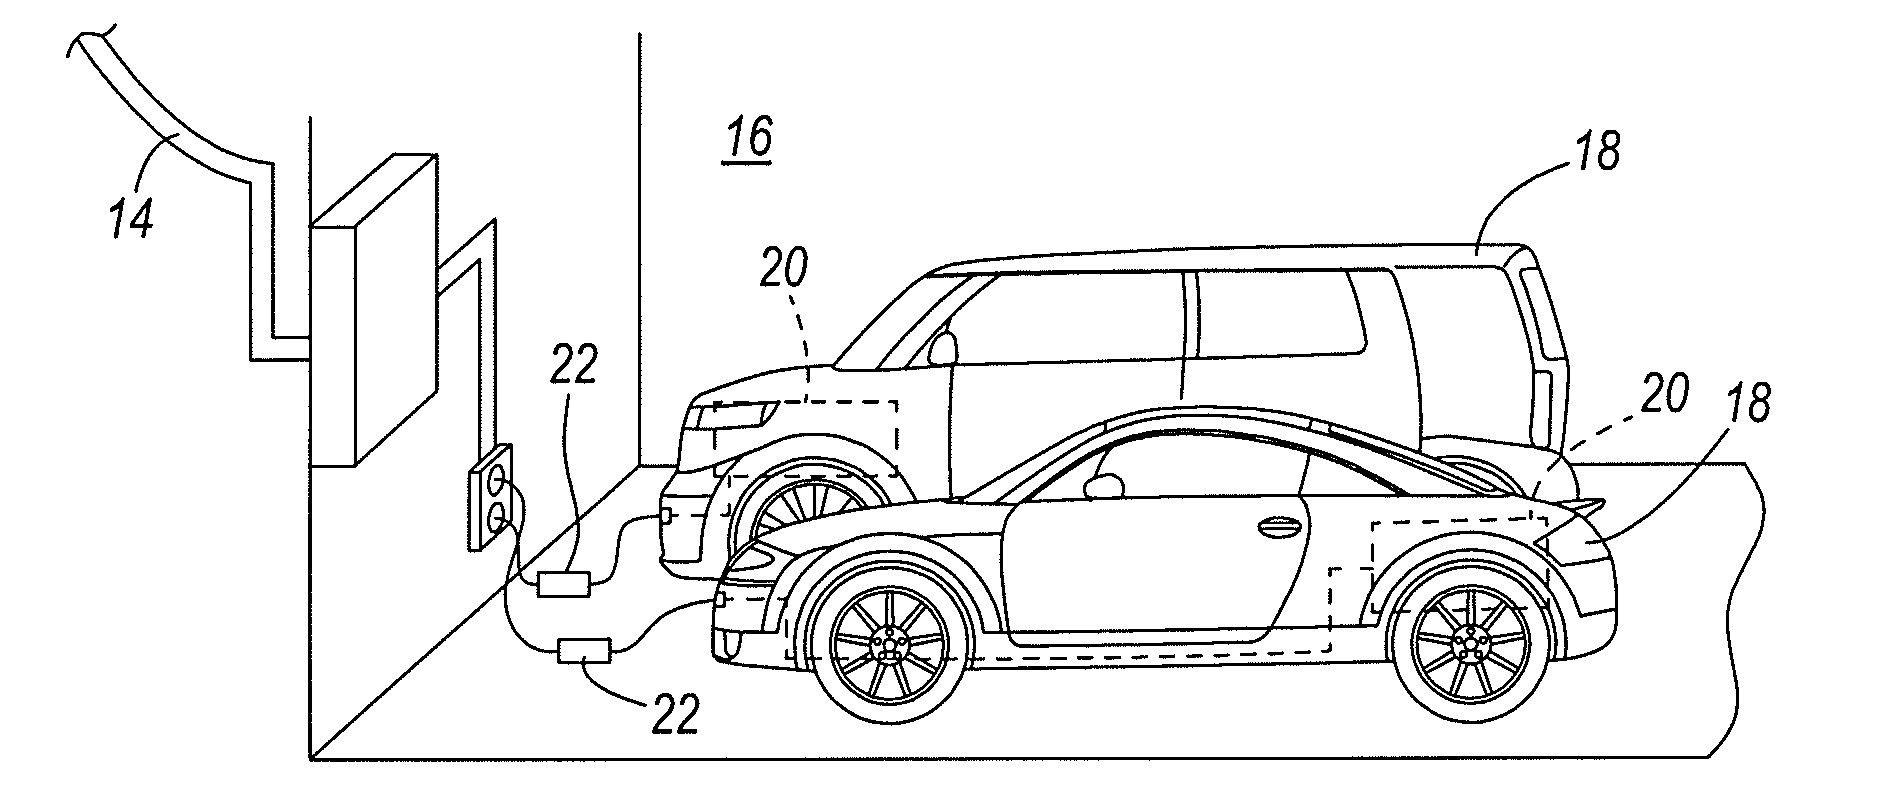 Vehicular batery charger, charging system, and method